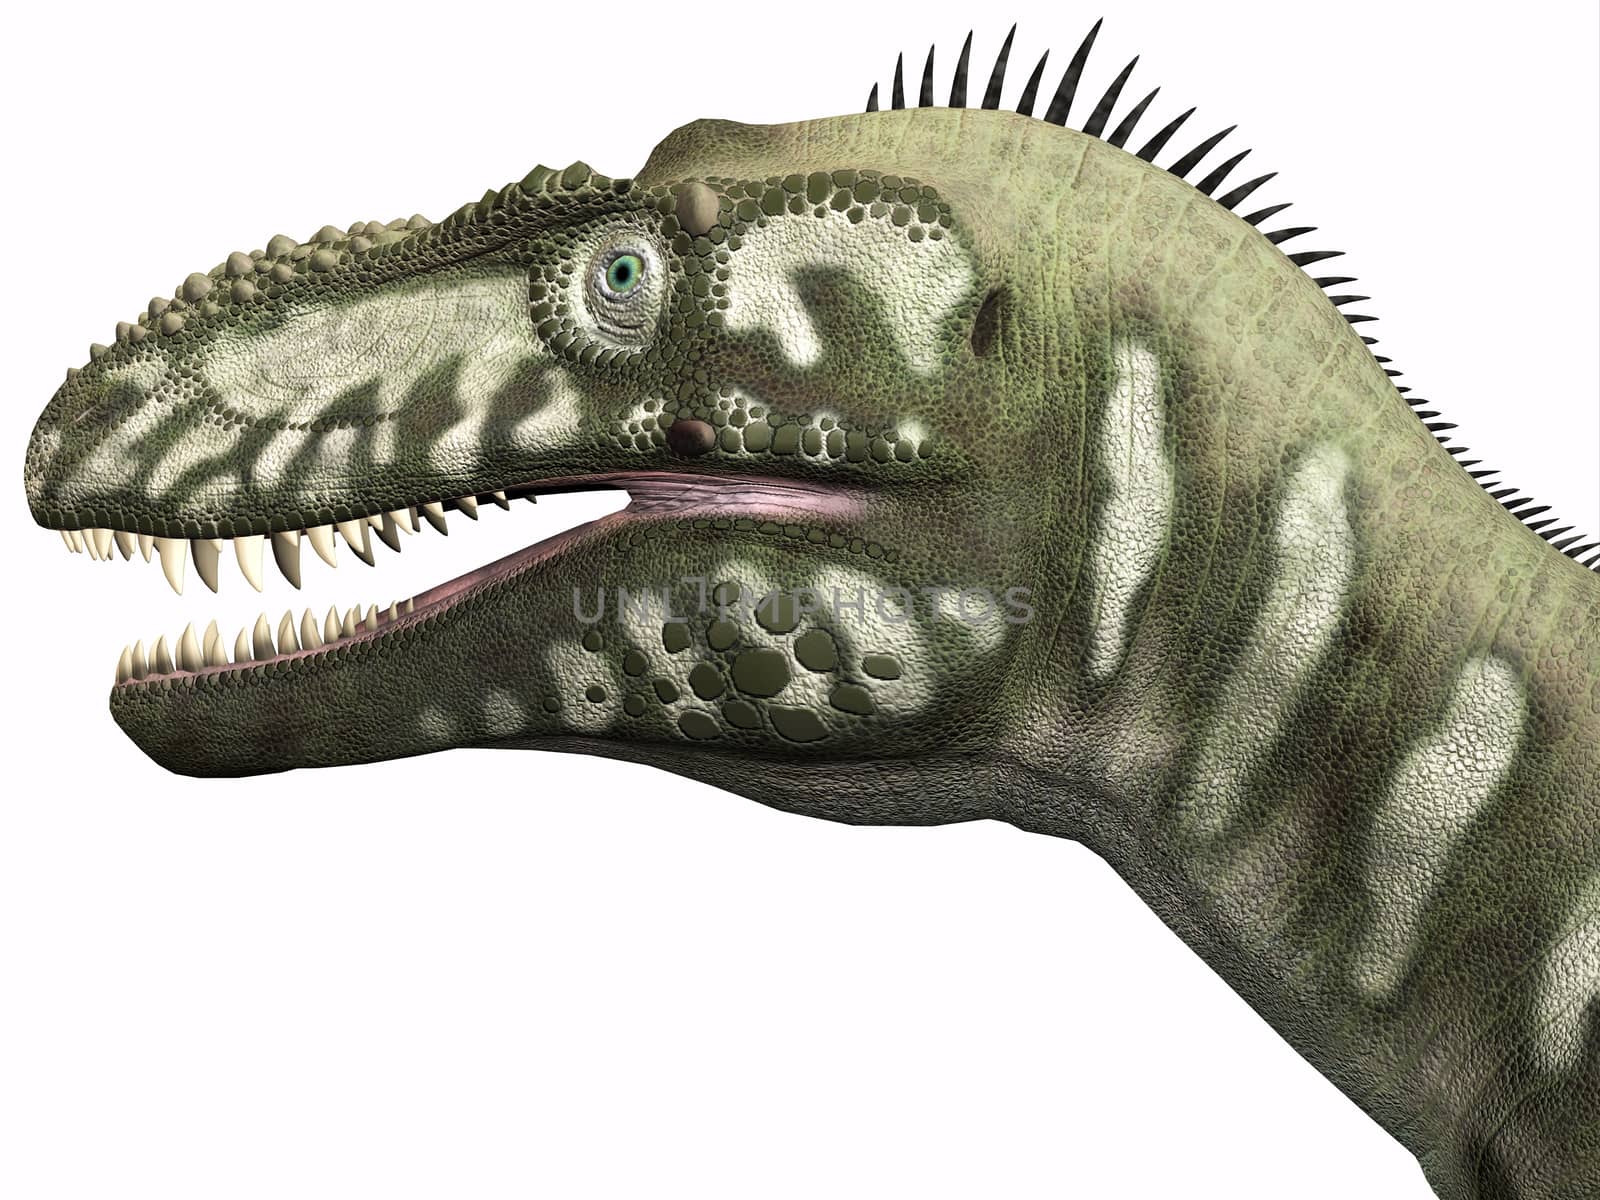 Bistahieversor was a carnivorous dinosaur that lived in the Cretaceous Period of New Mexico.